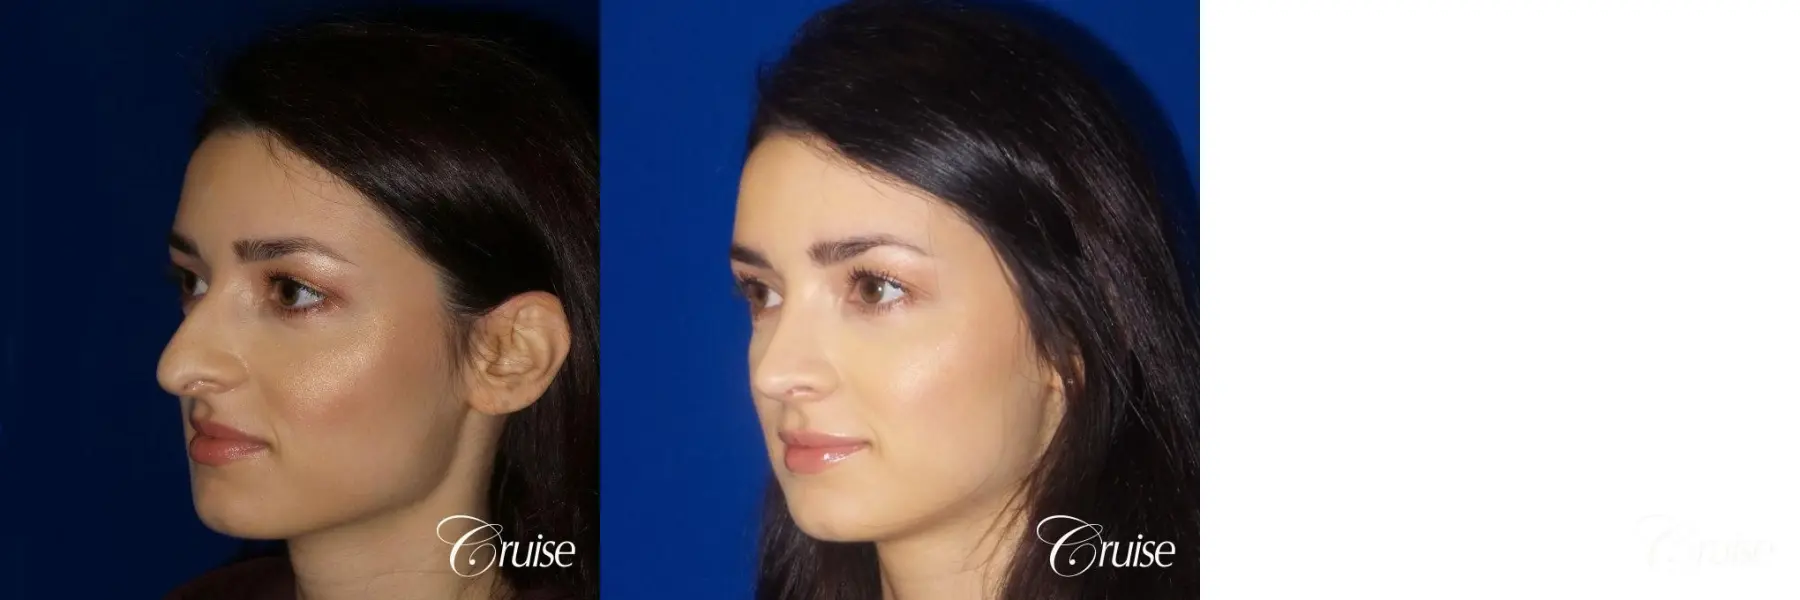 Rhinoplasty specialist Orange County CA - Before and After 2